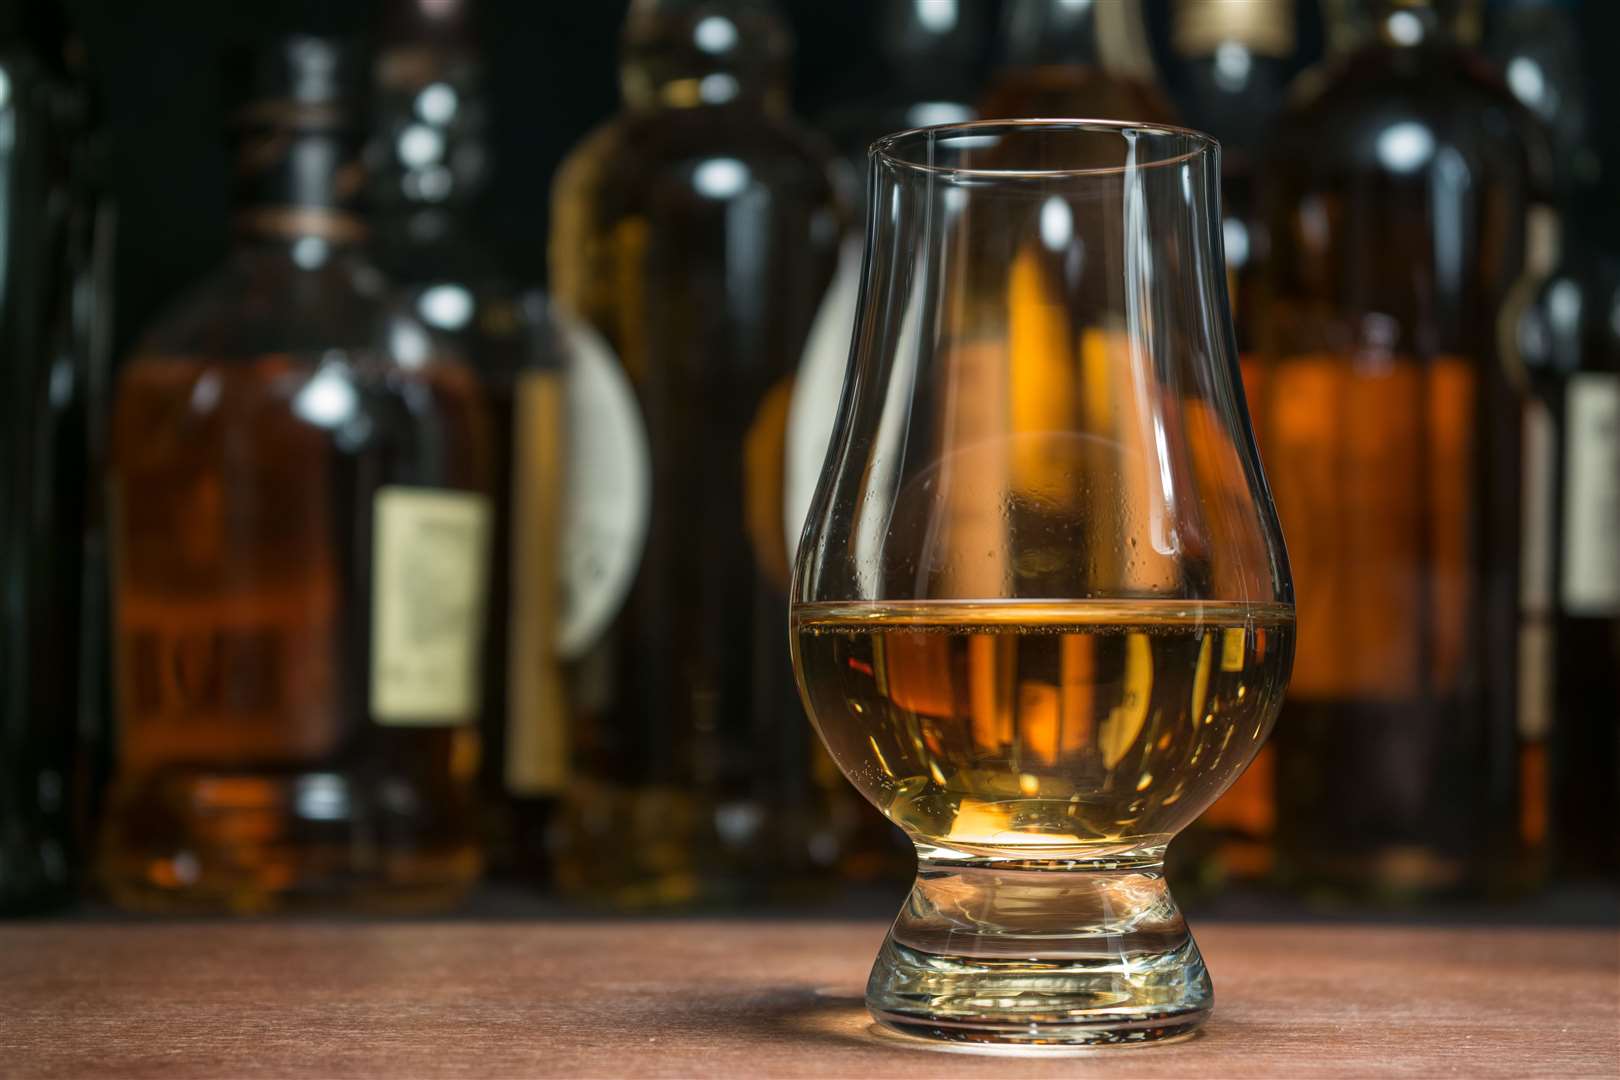 The Scotch Whisky Association says tariffs are damaging the industry.